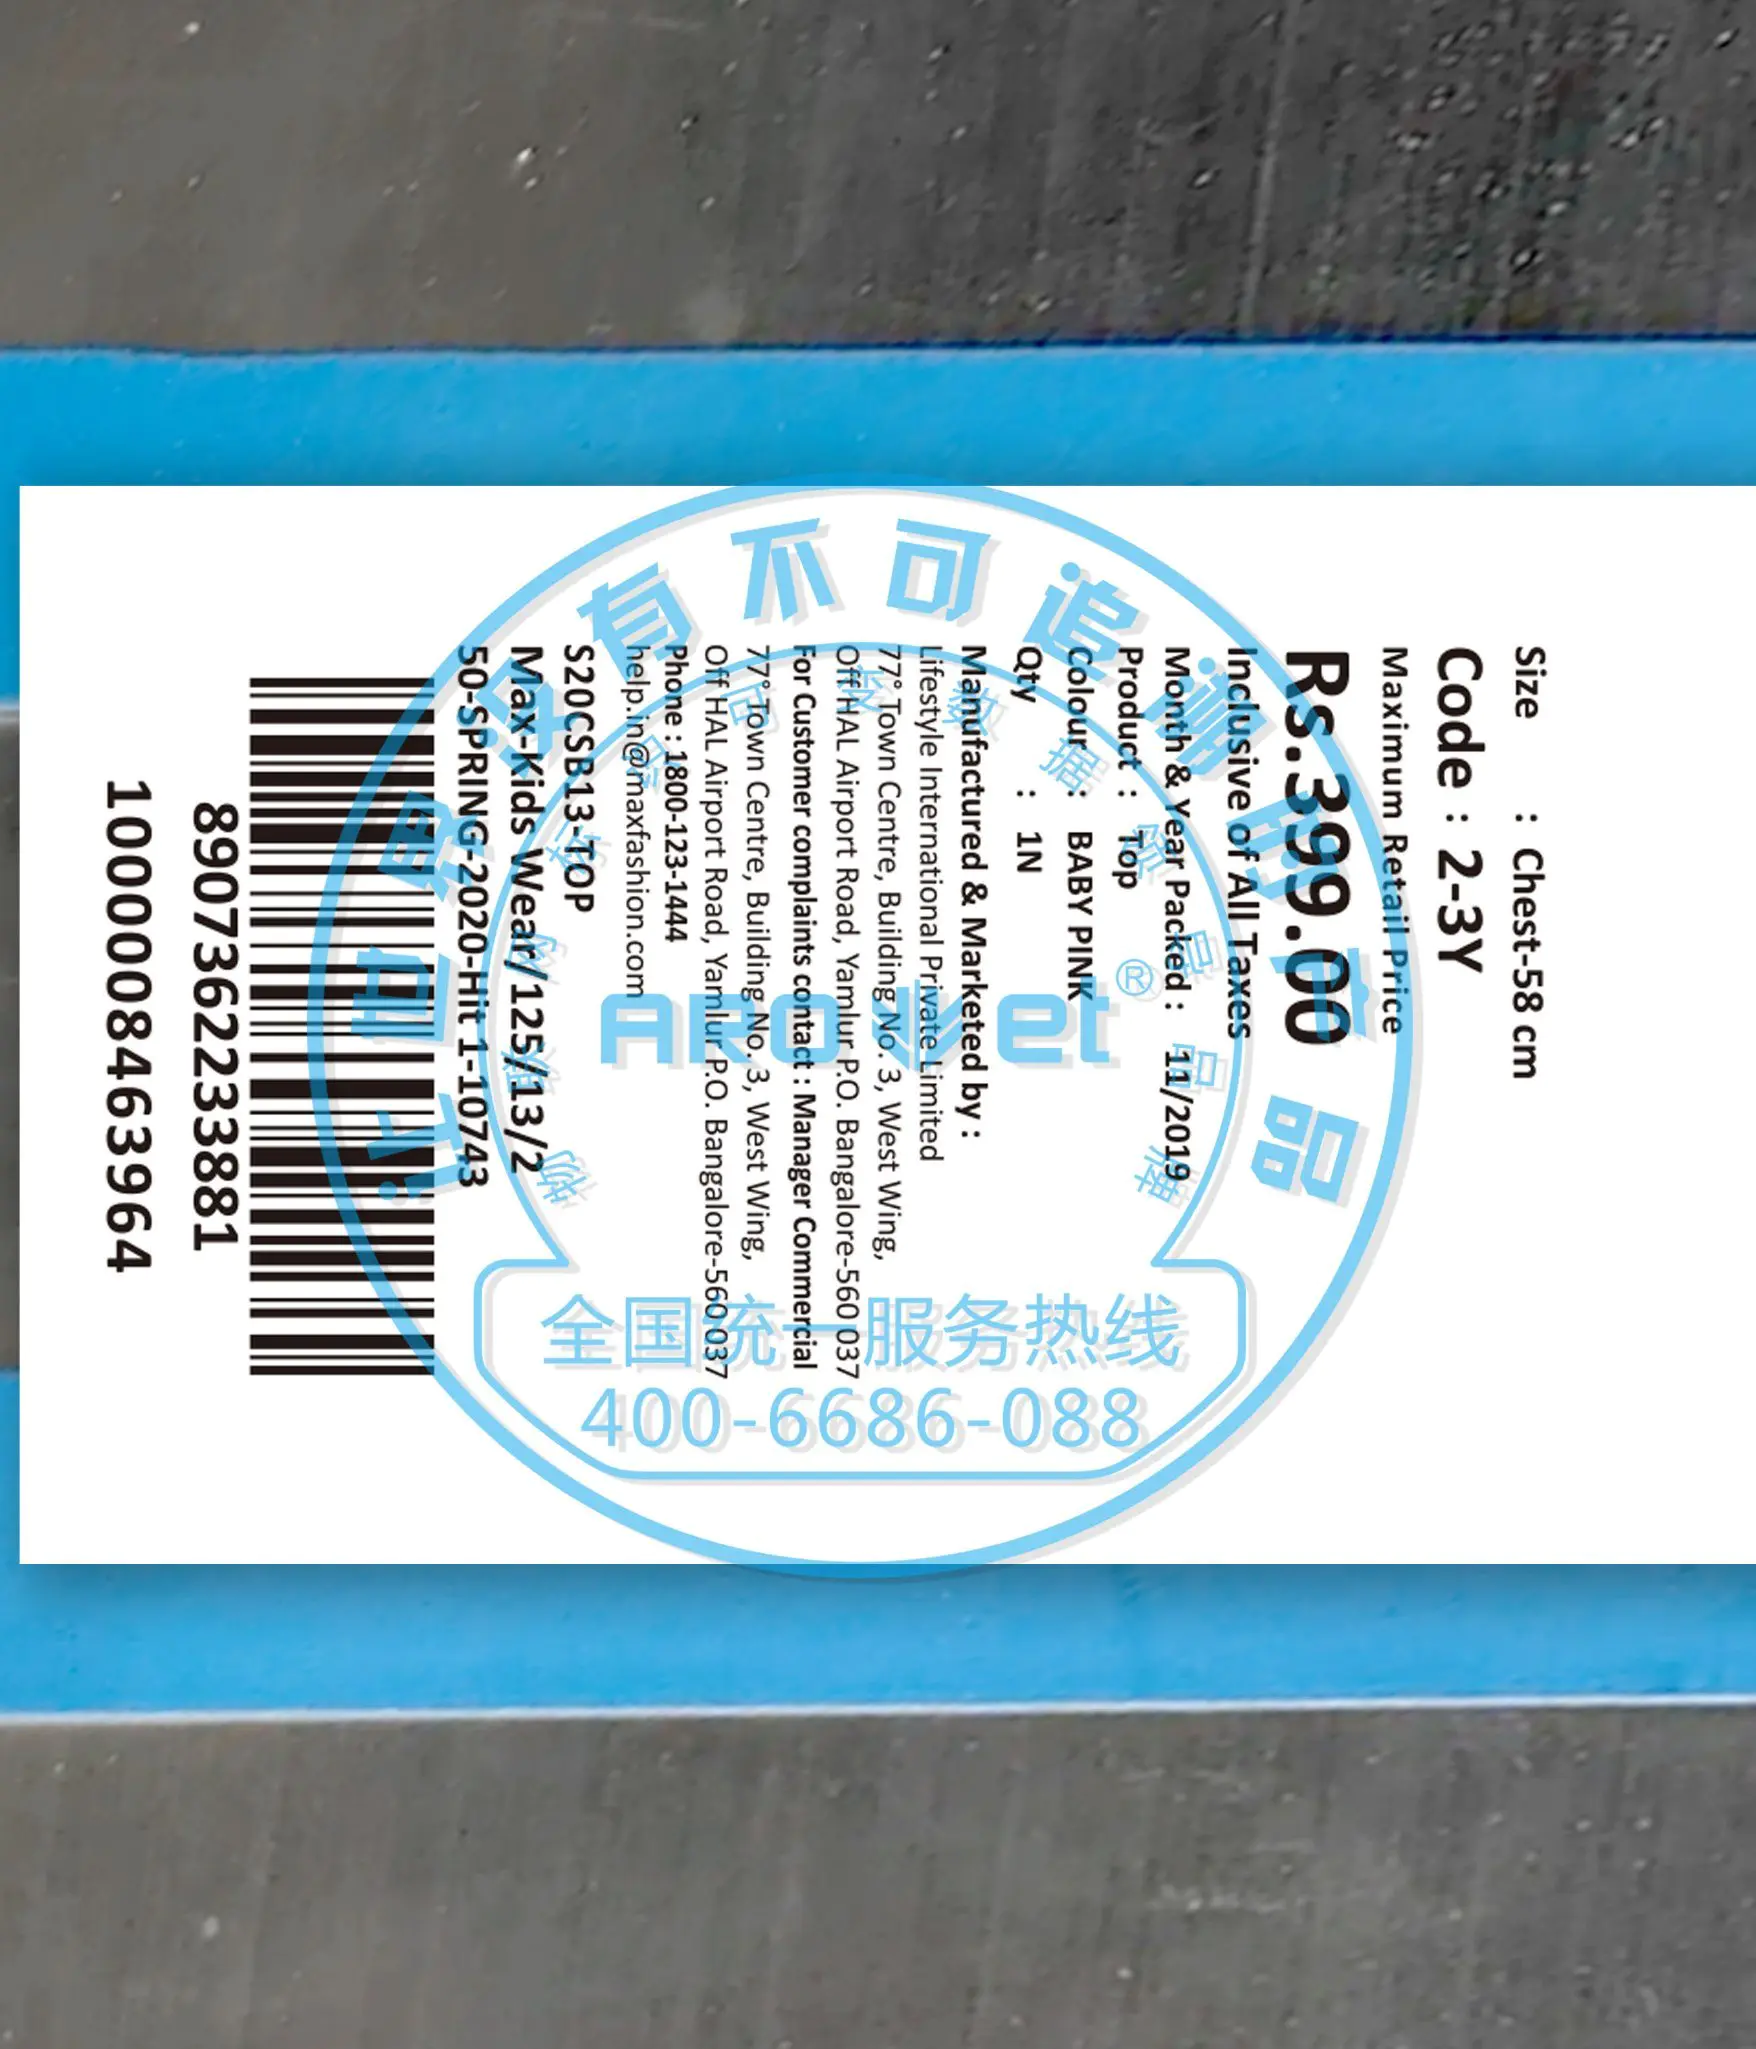 Barcode Serial Number and Date UV Coding Machines